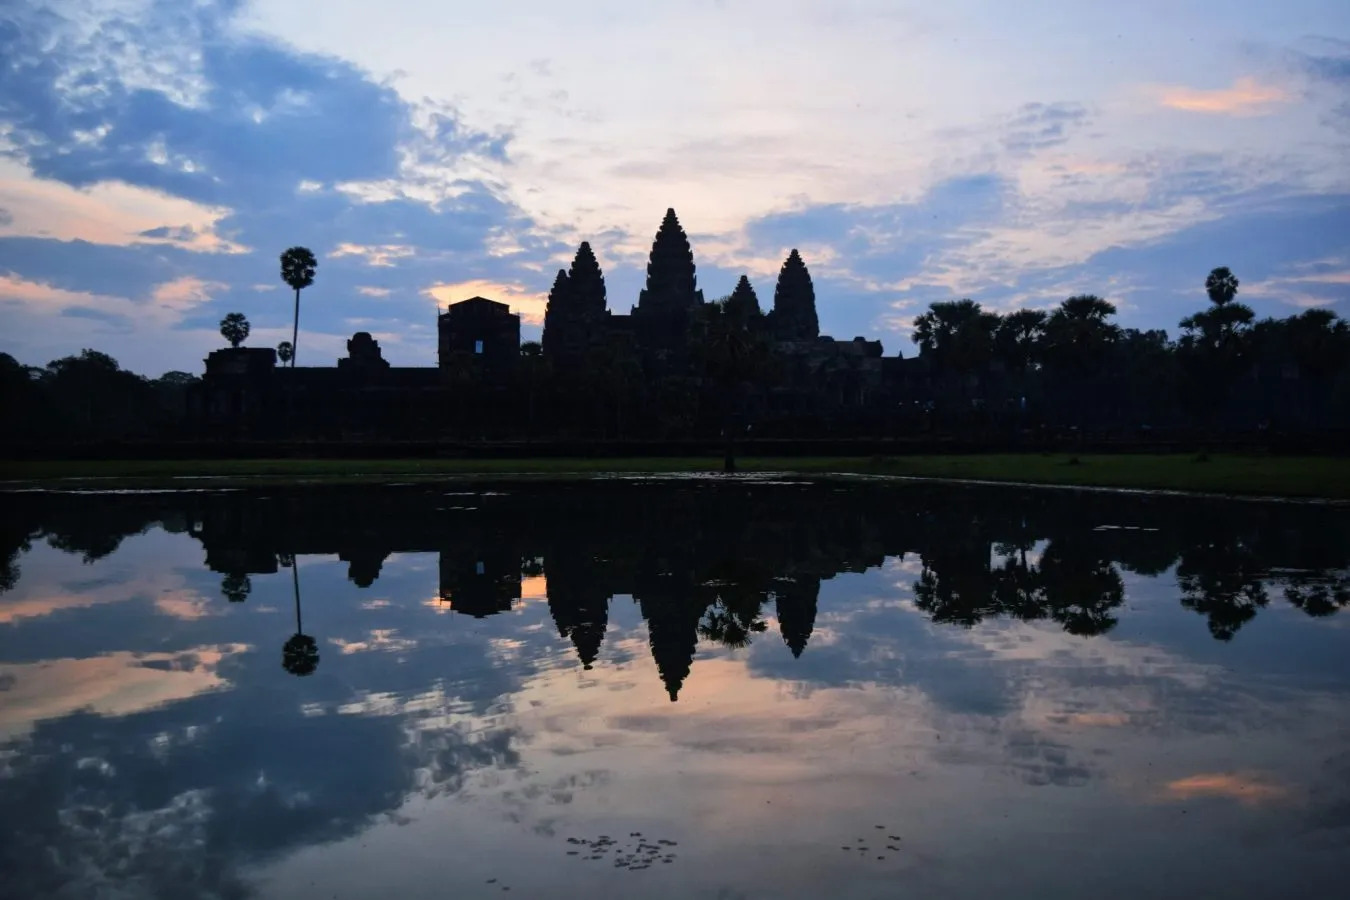 angkor wat sunrise over the main temple, one of the best things to do when touring angkor wat cambodia